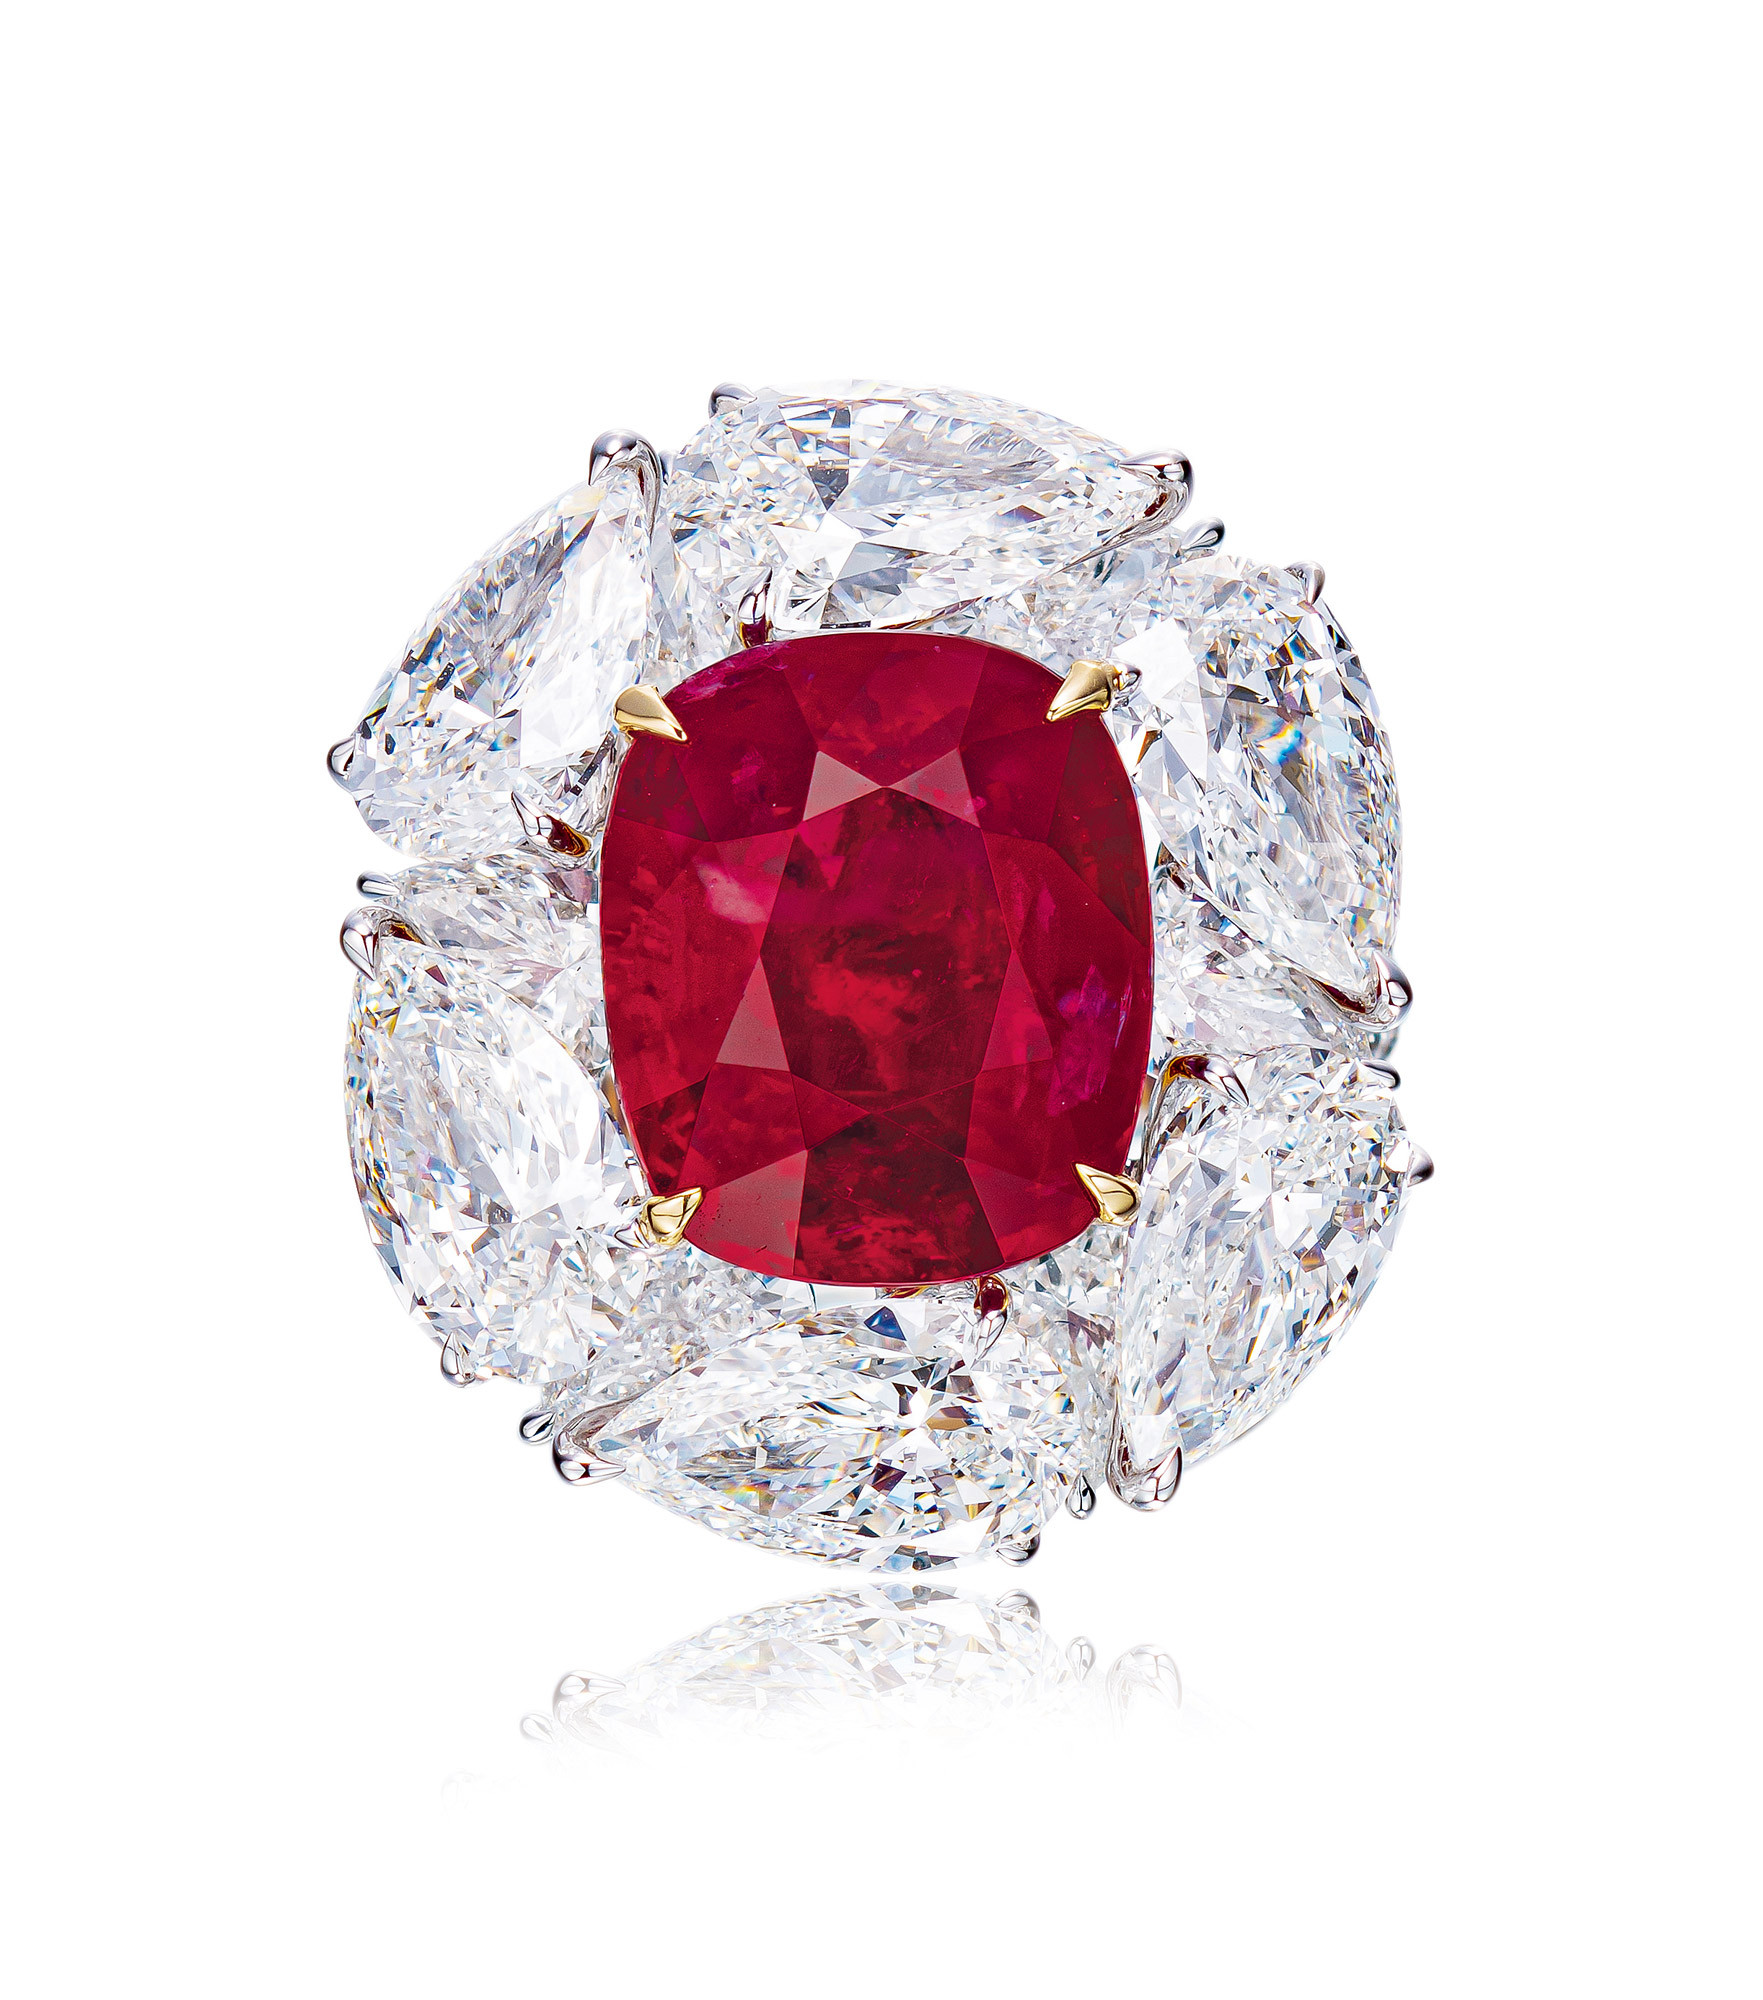 AN EXCEPTIONAL 8.07 CARAT BURMESE ‘PIGEON’S BLOOD’ RUBY AND DIAMOND RING